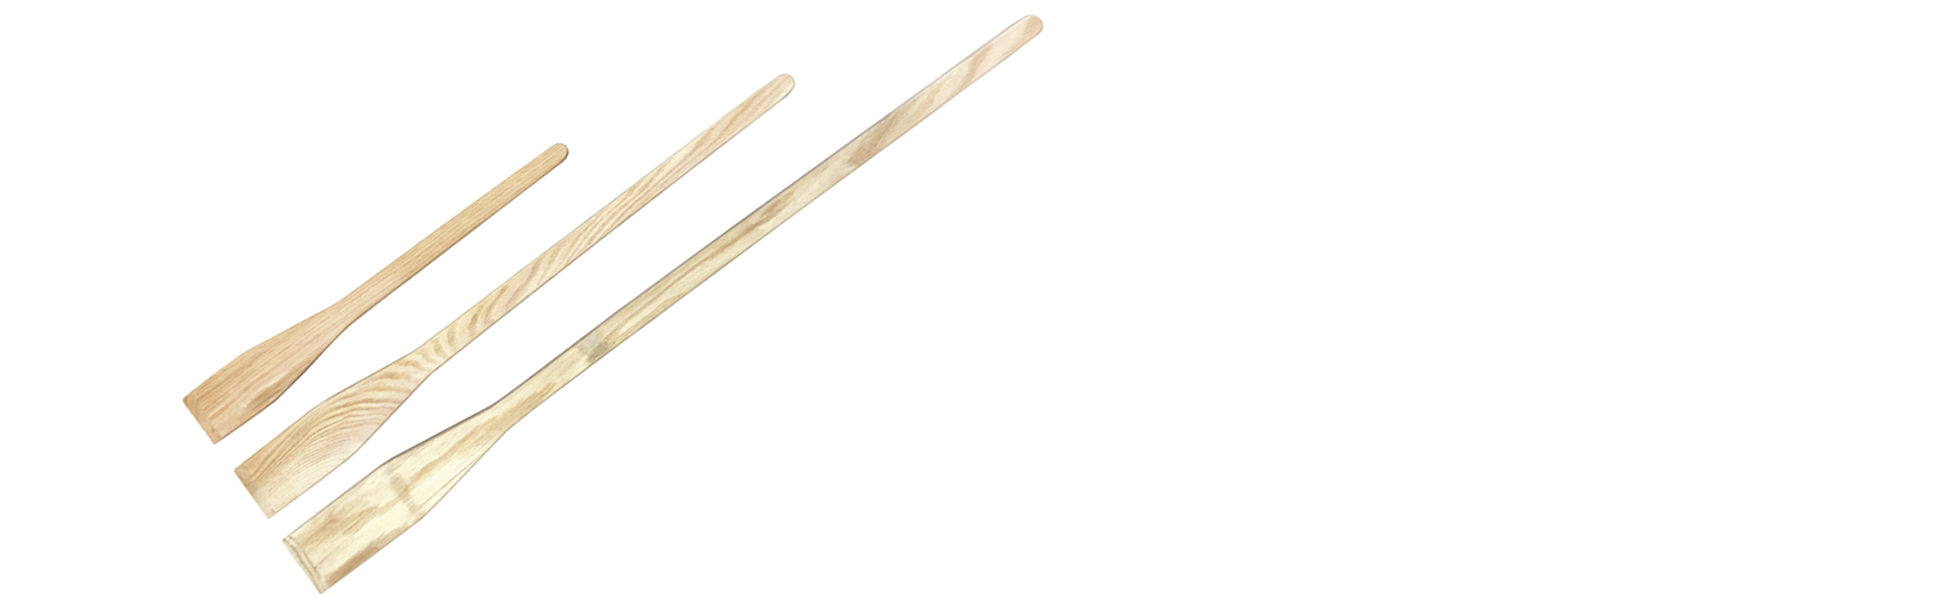 Wooden Mixing Paddle Set